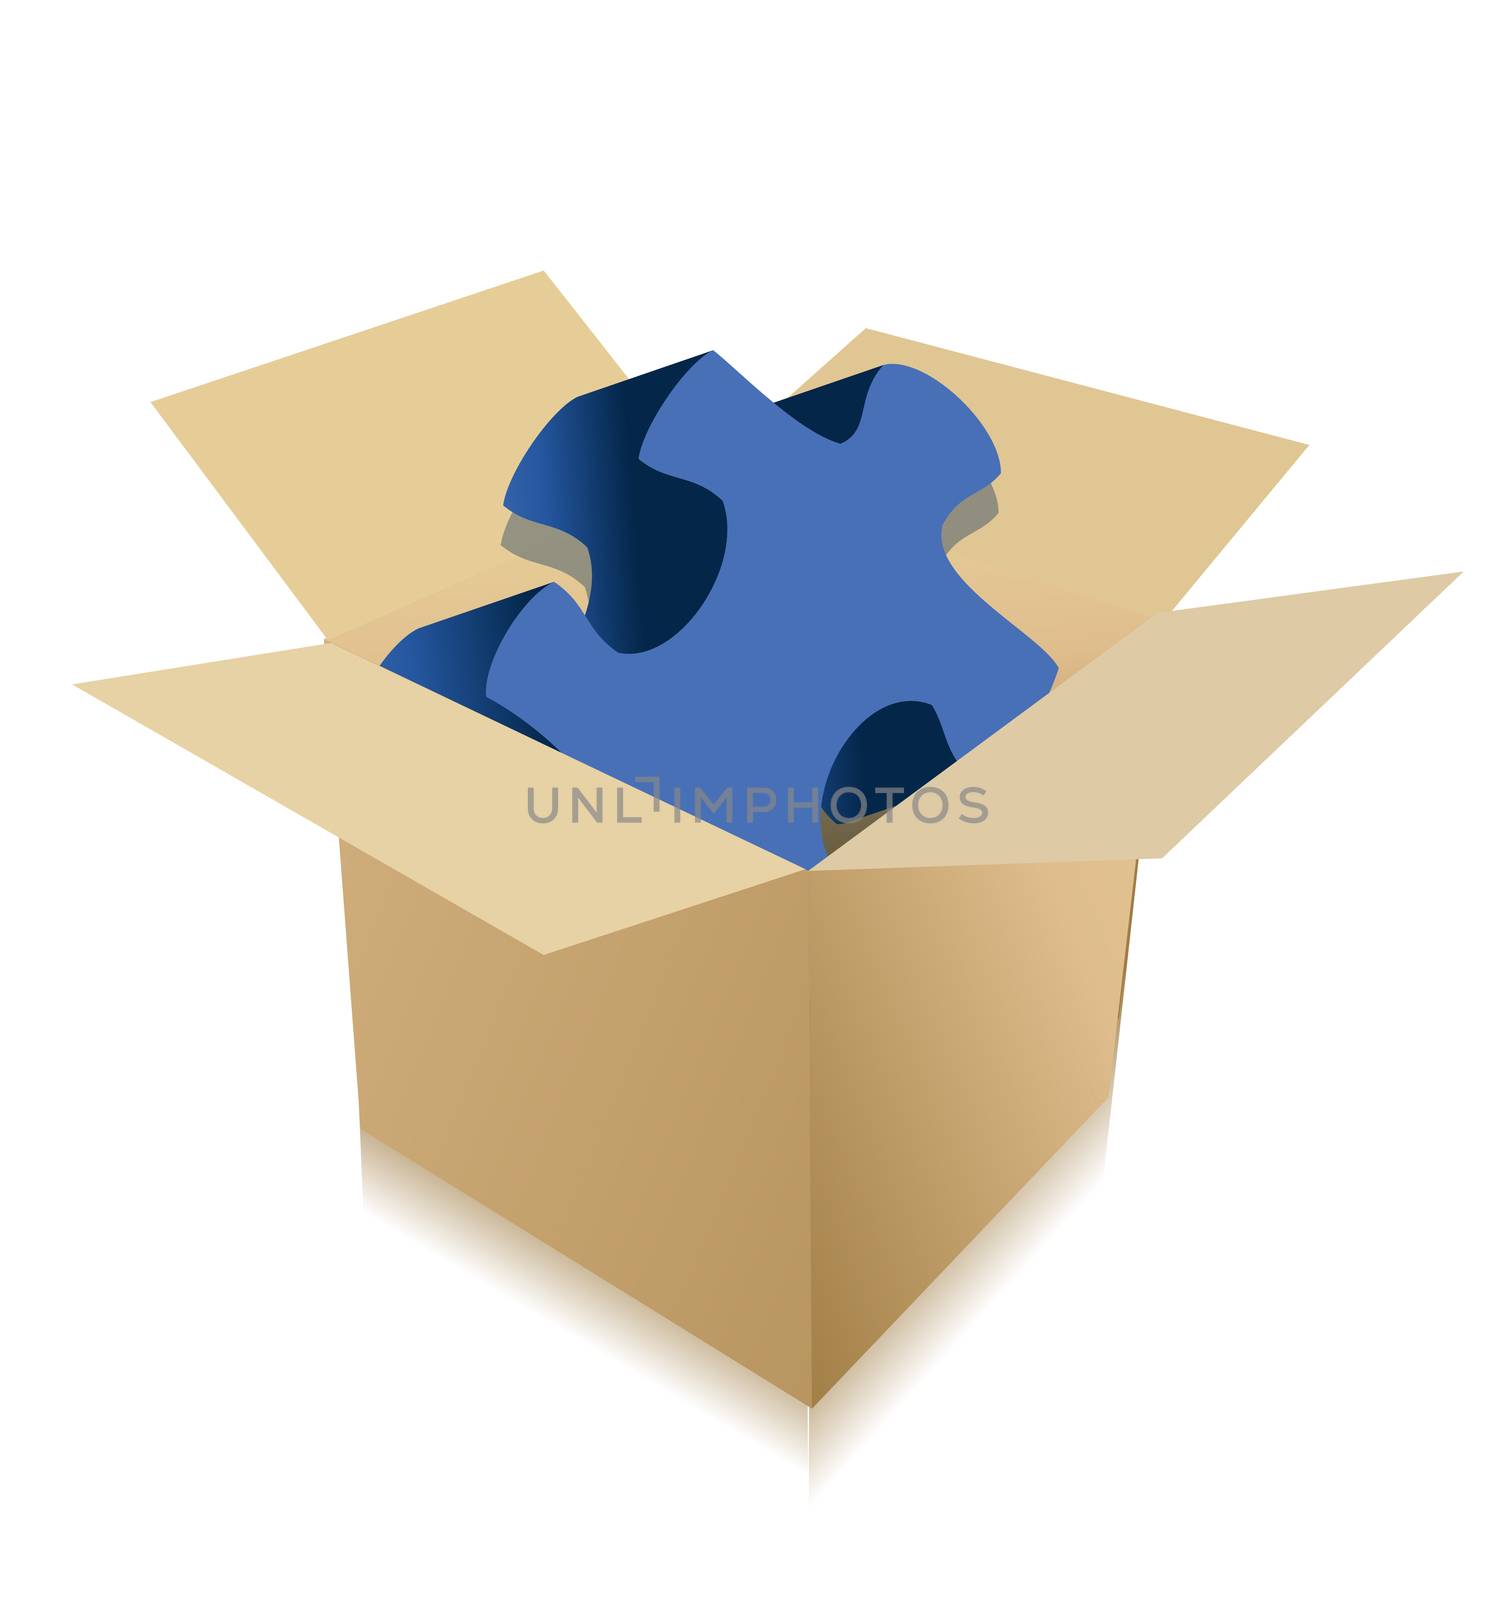 Cardboard box with puzzle on a white background.